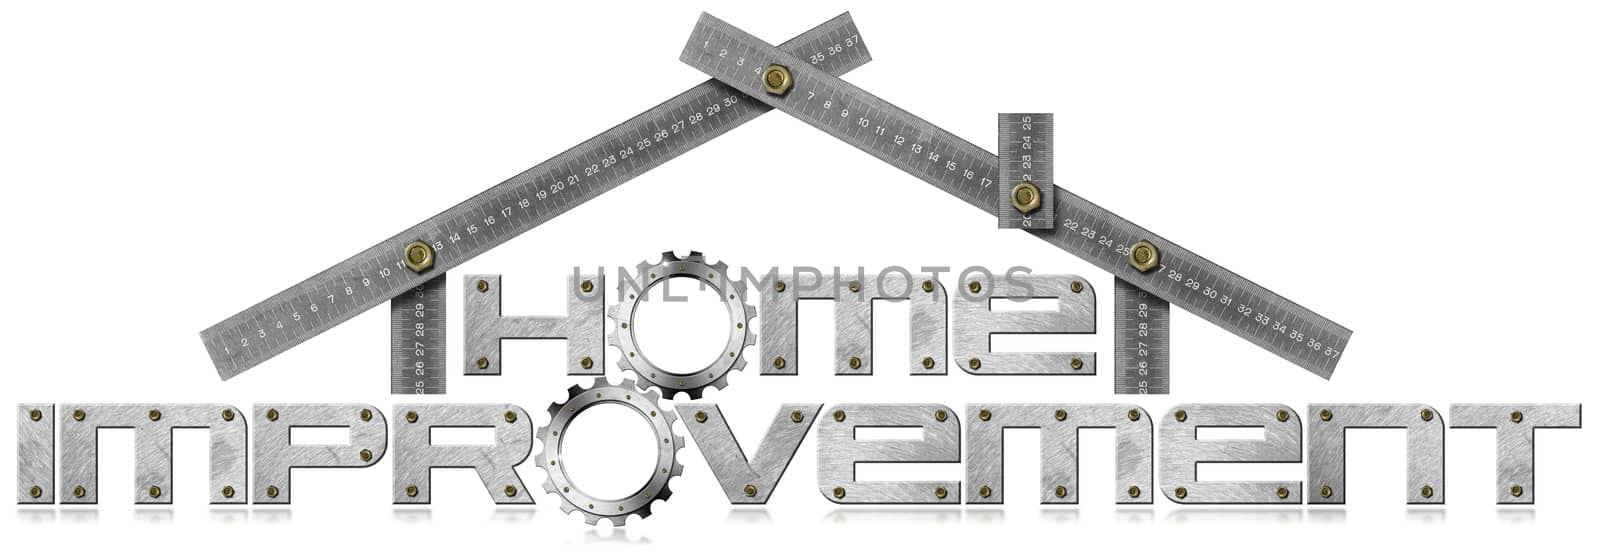 Home Improvement Symbol with Metal Gears by catalby